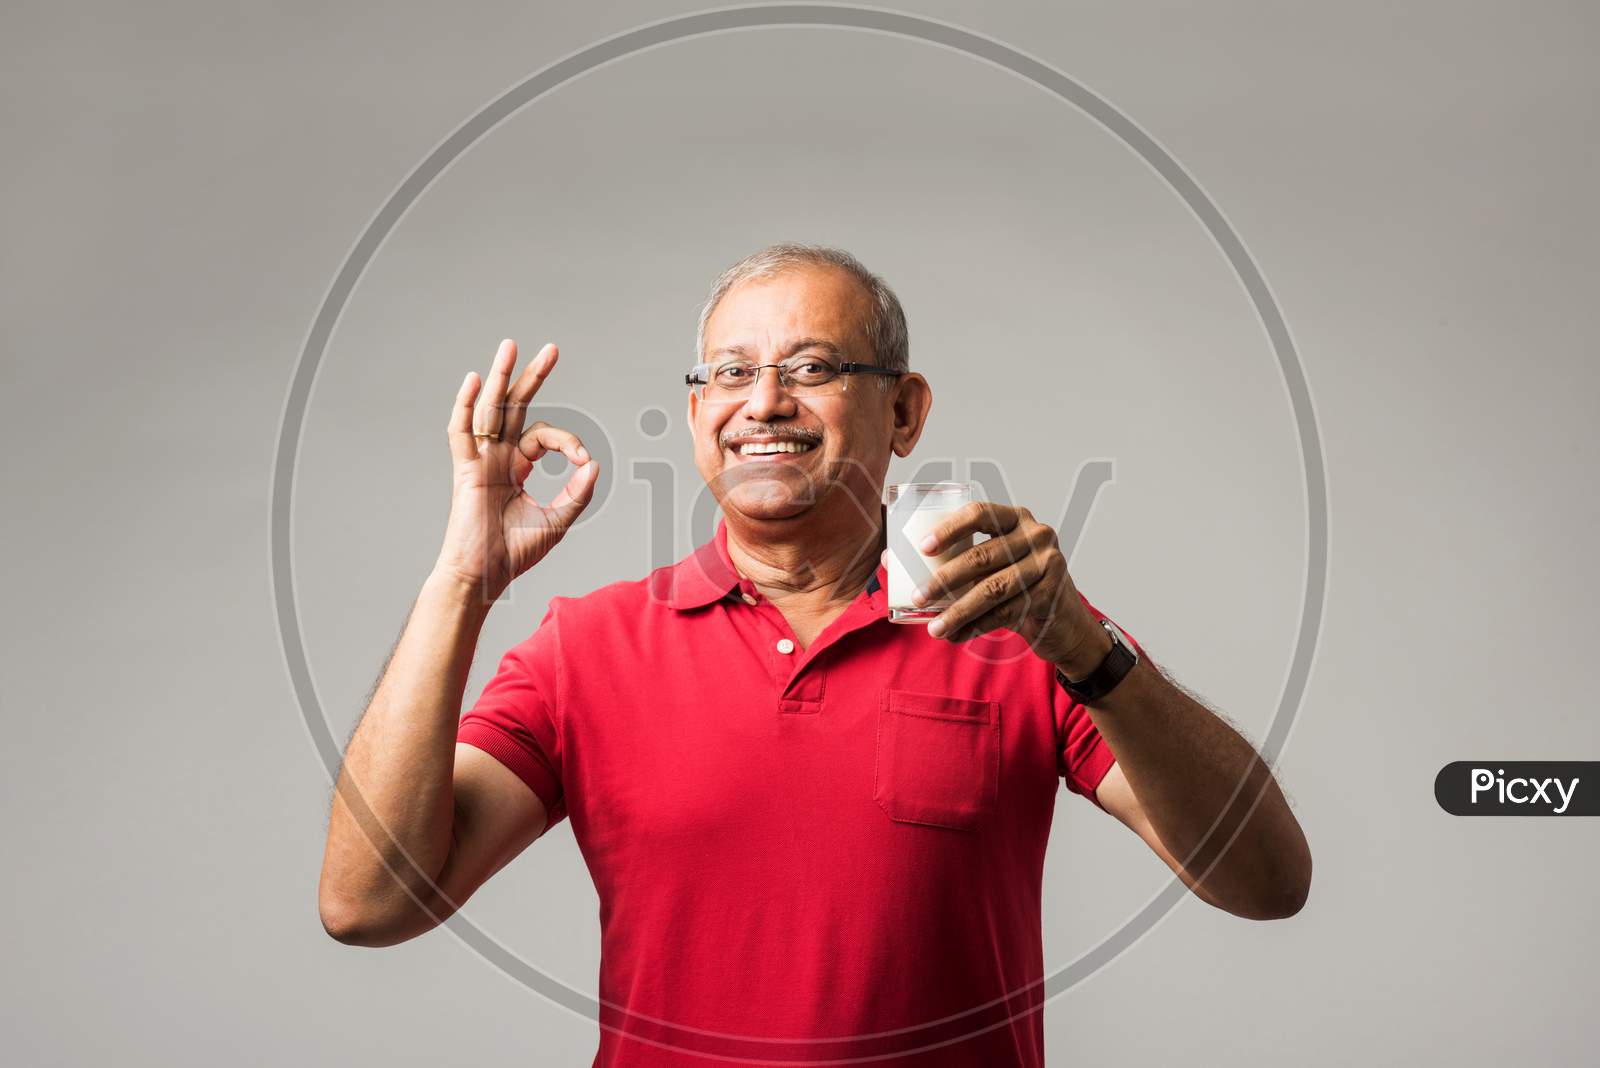 Senior Indian / asian man with a glass of milk and or fresh apple - healthy old age concept